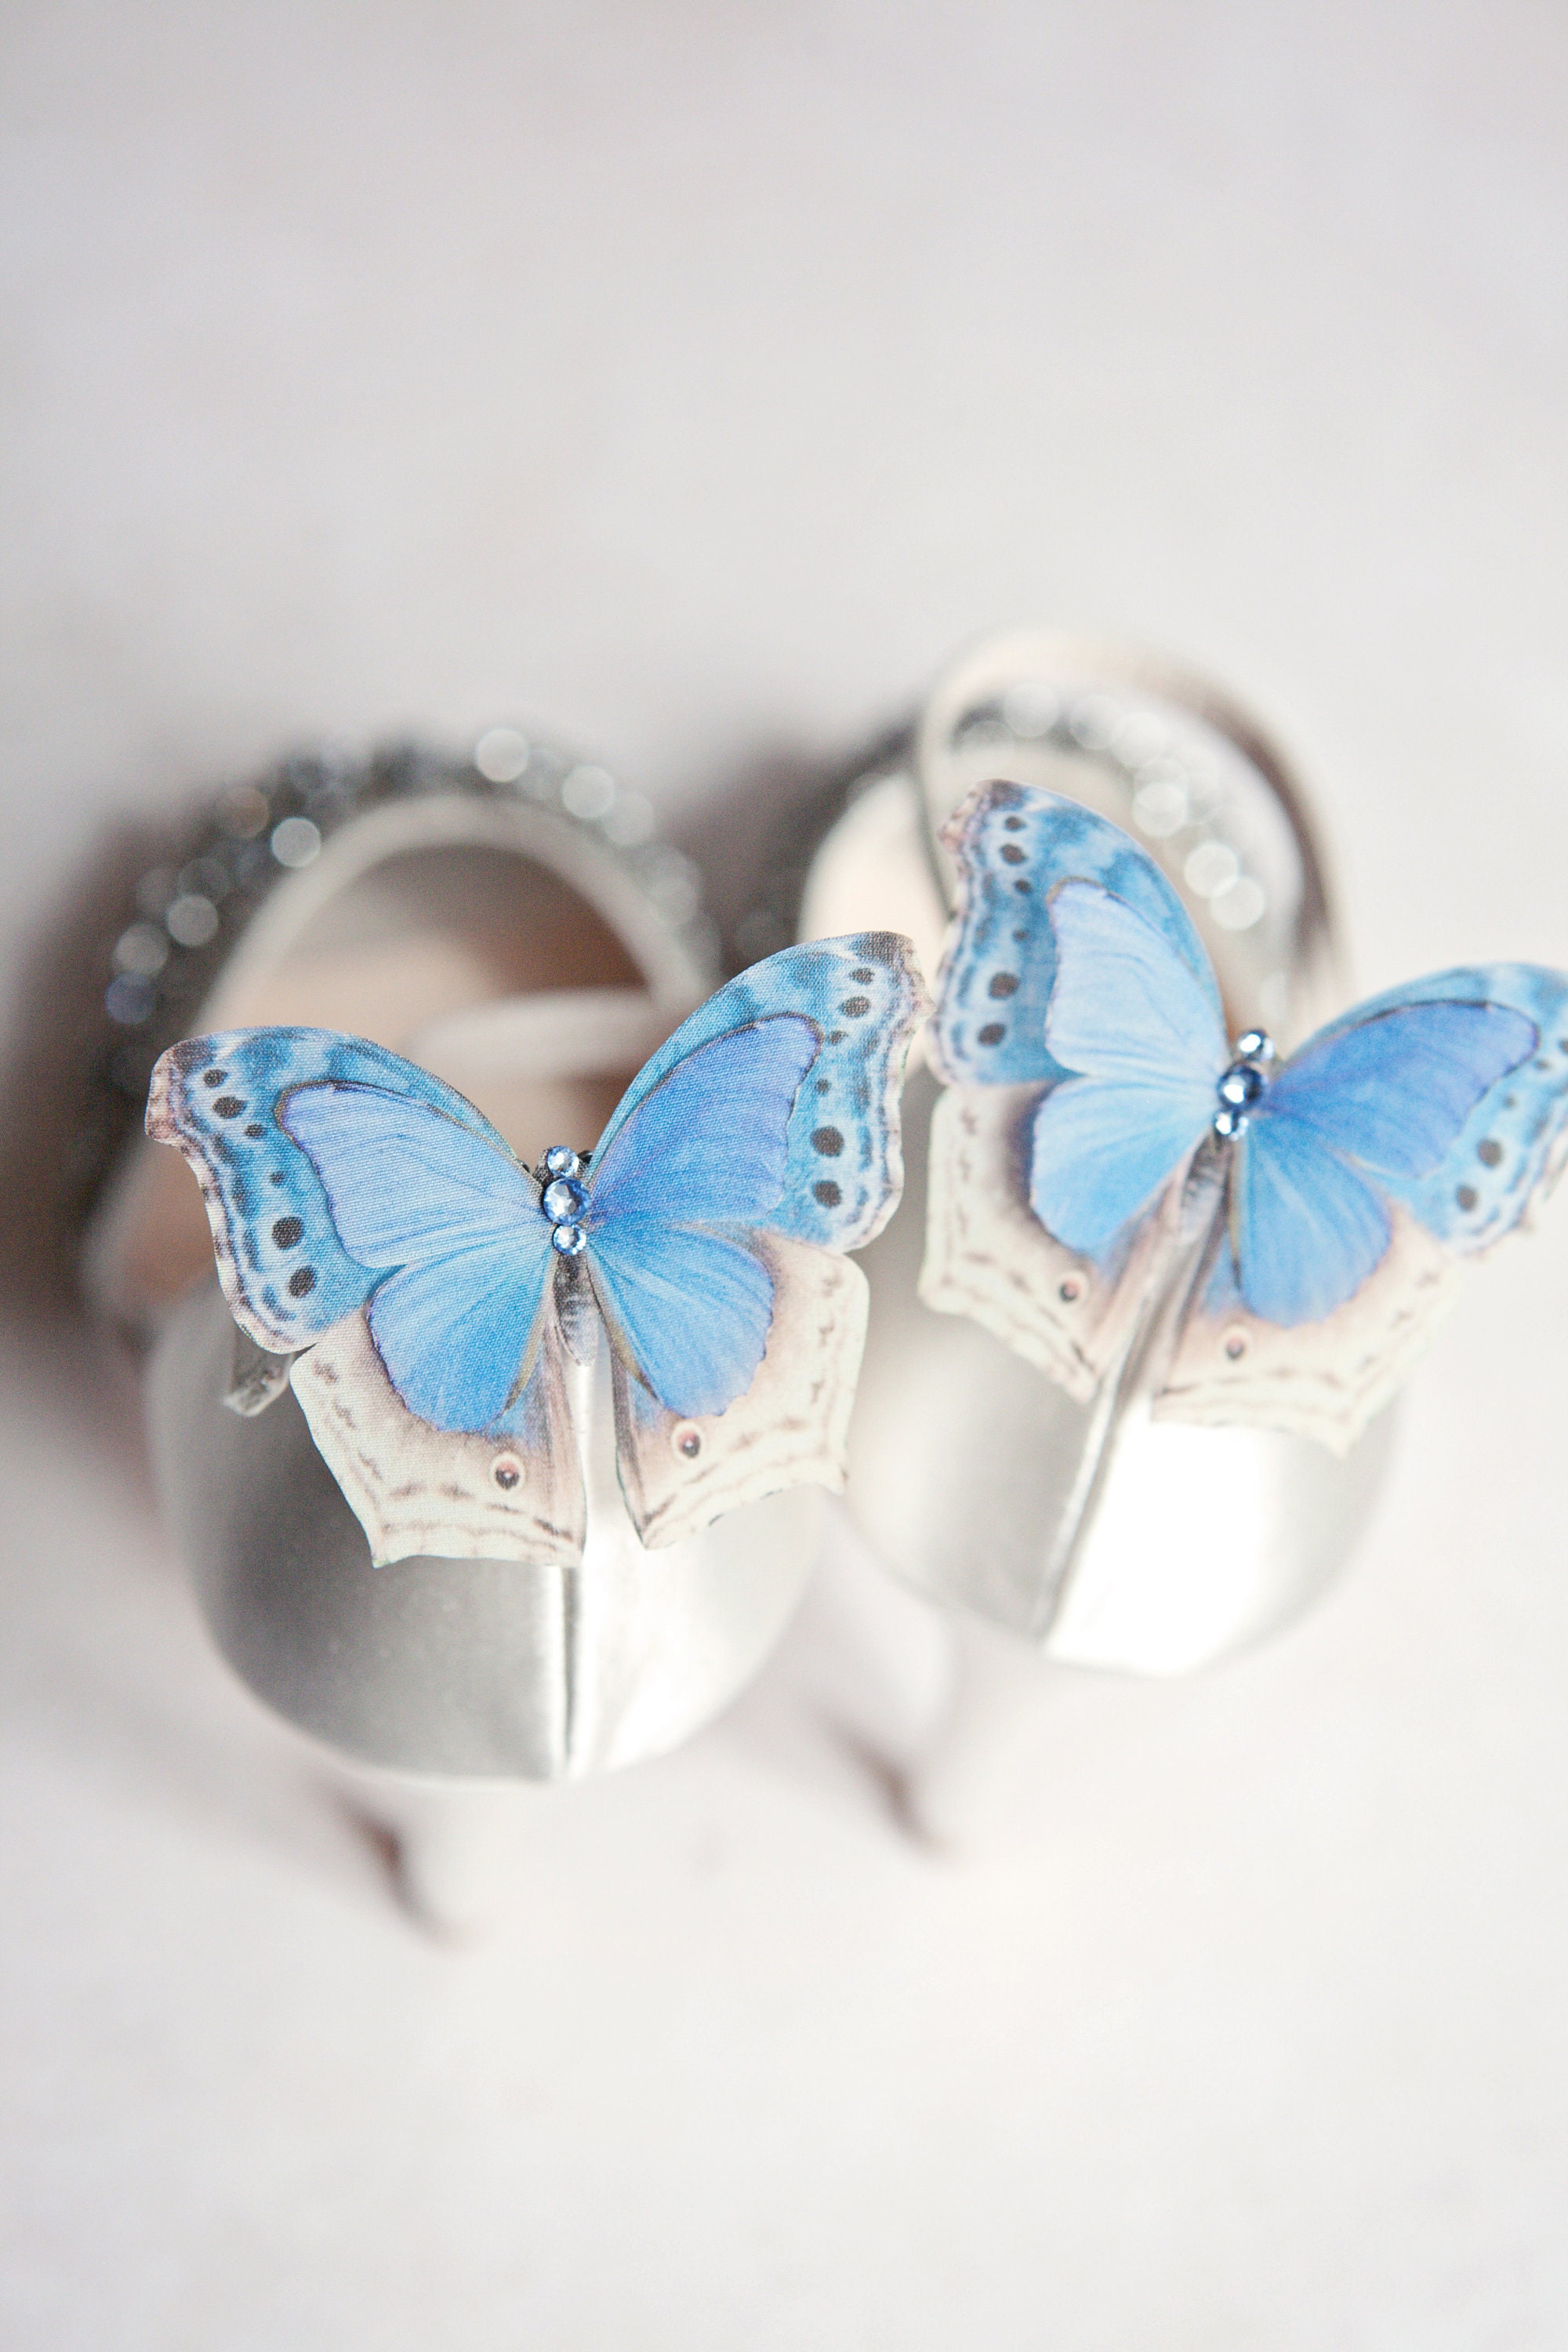 1pair White Rhinestone Decor Butterfly Shaped Shoe Clips For Diy Heels &  Flats, Detachable